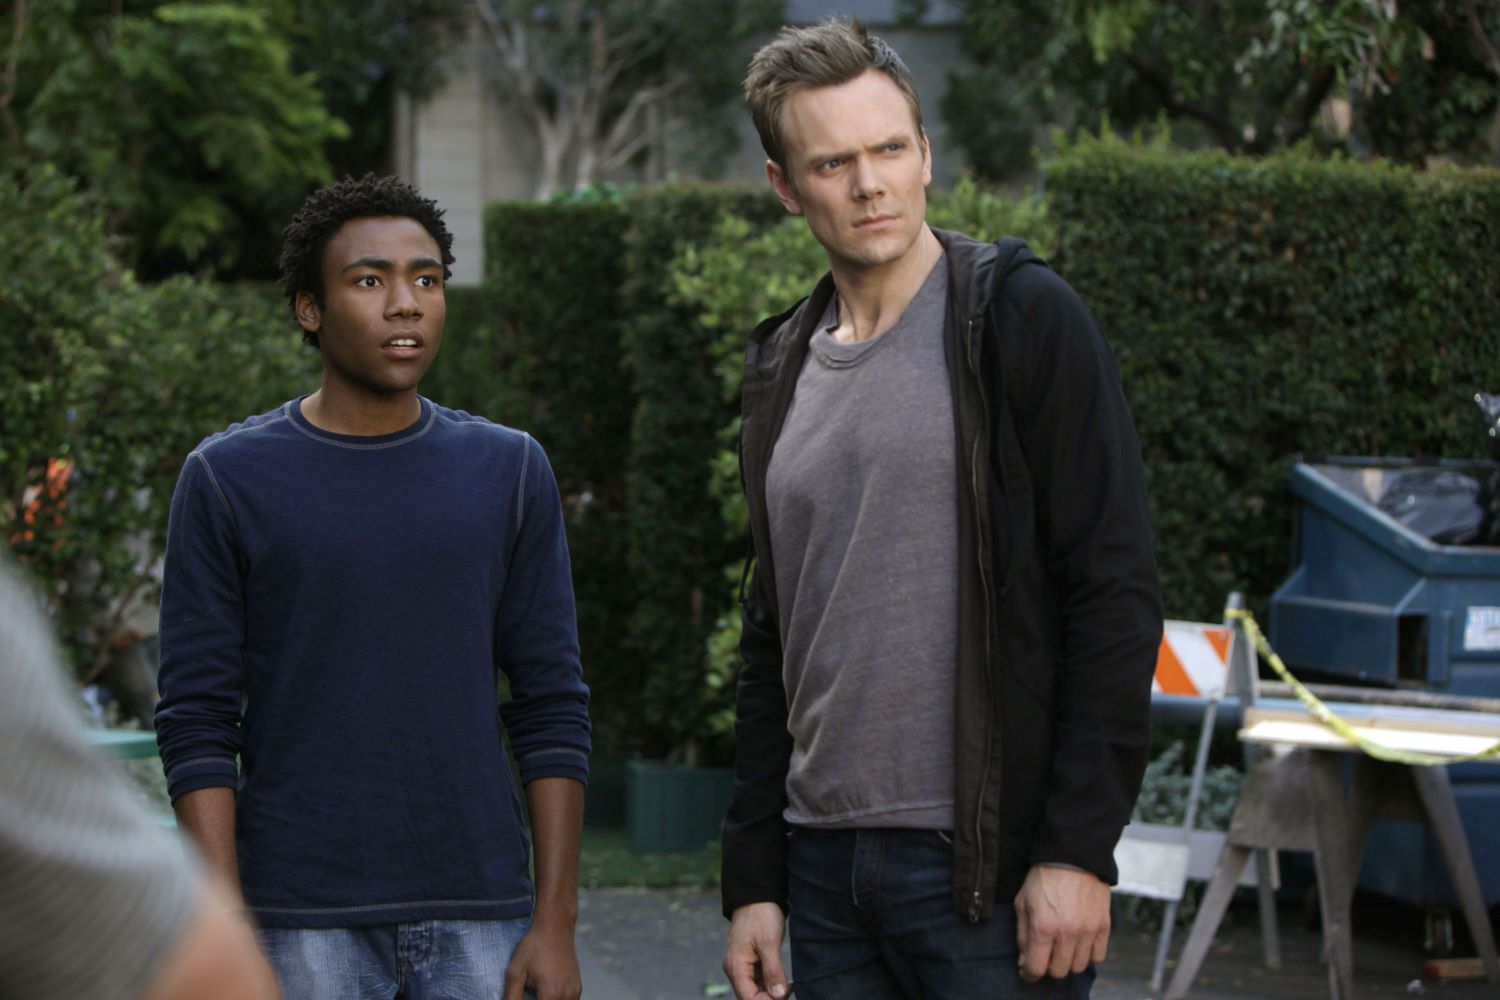 Donald Glover and Joel McHale in 'Community'